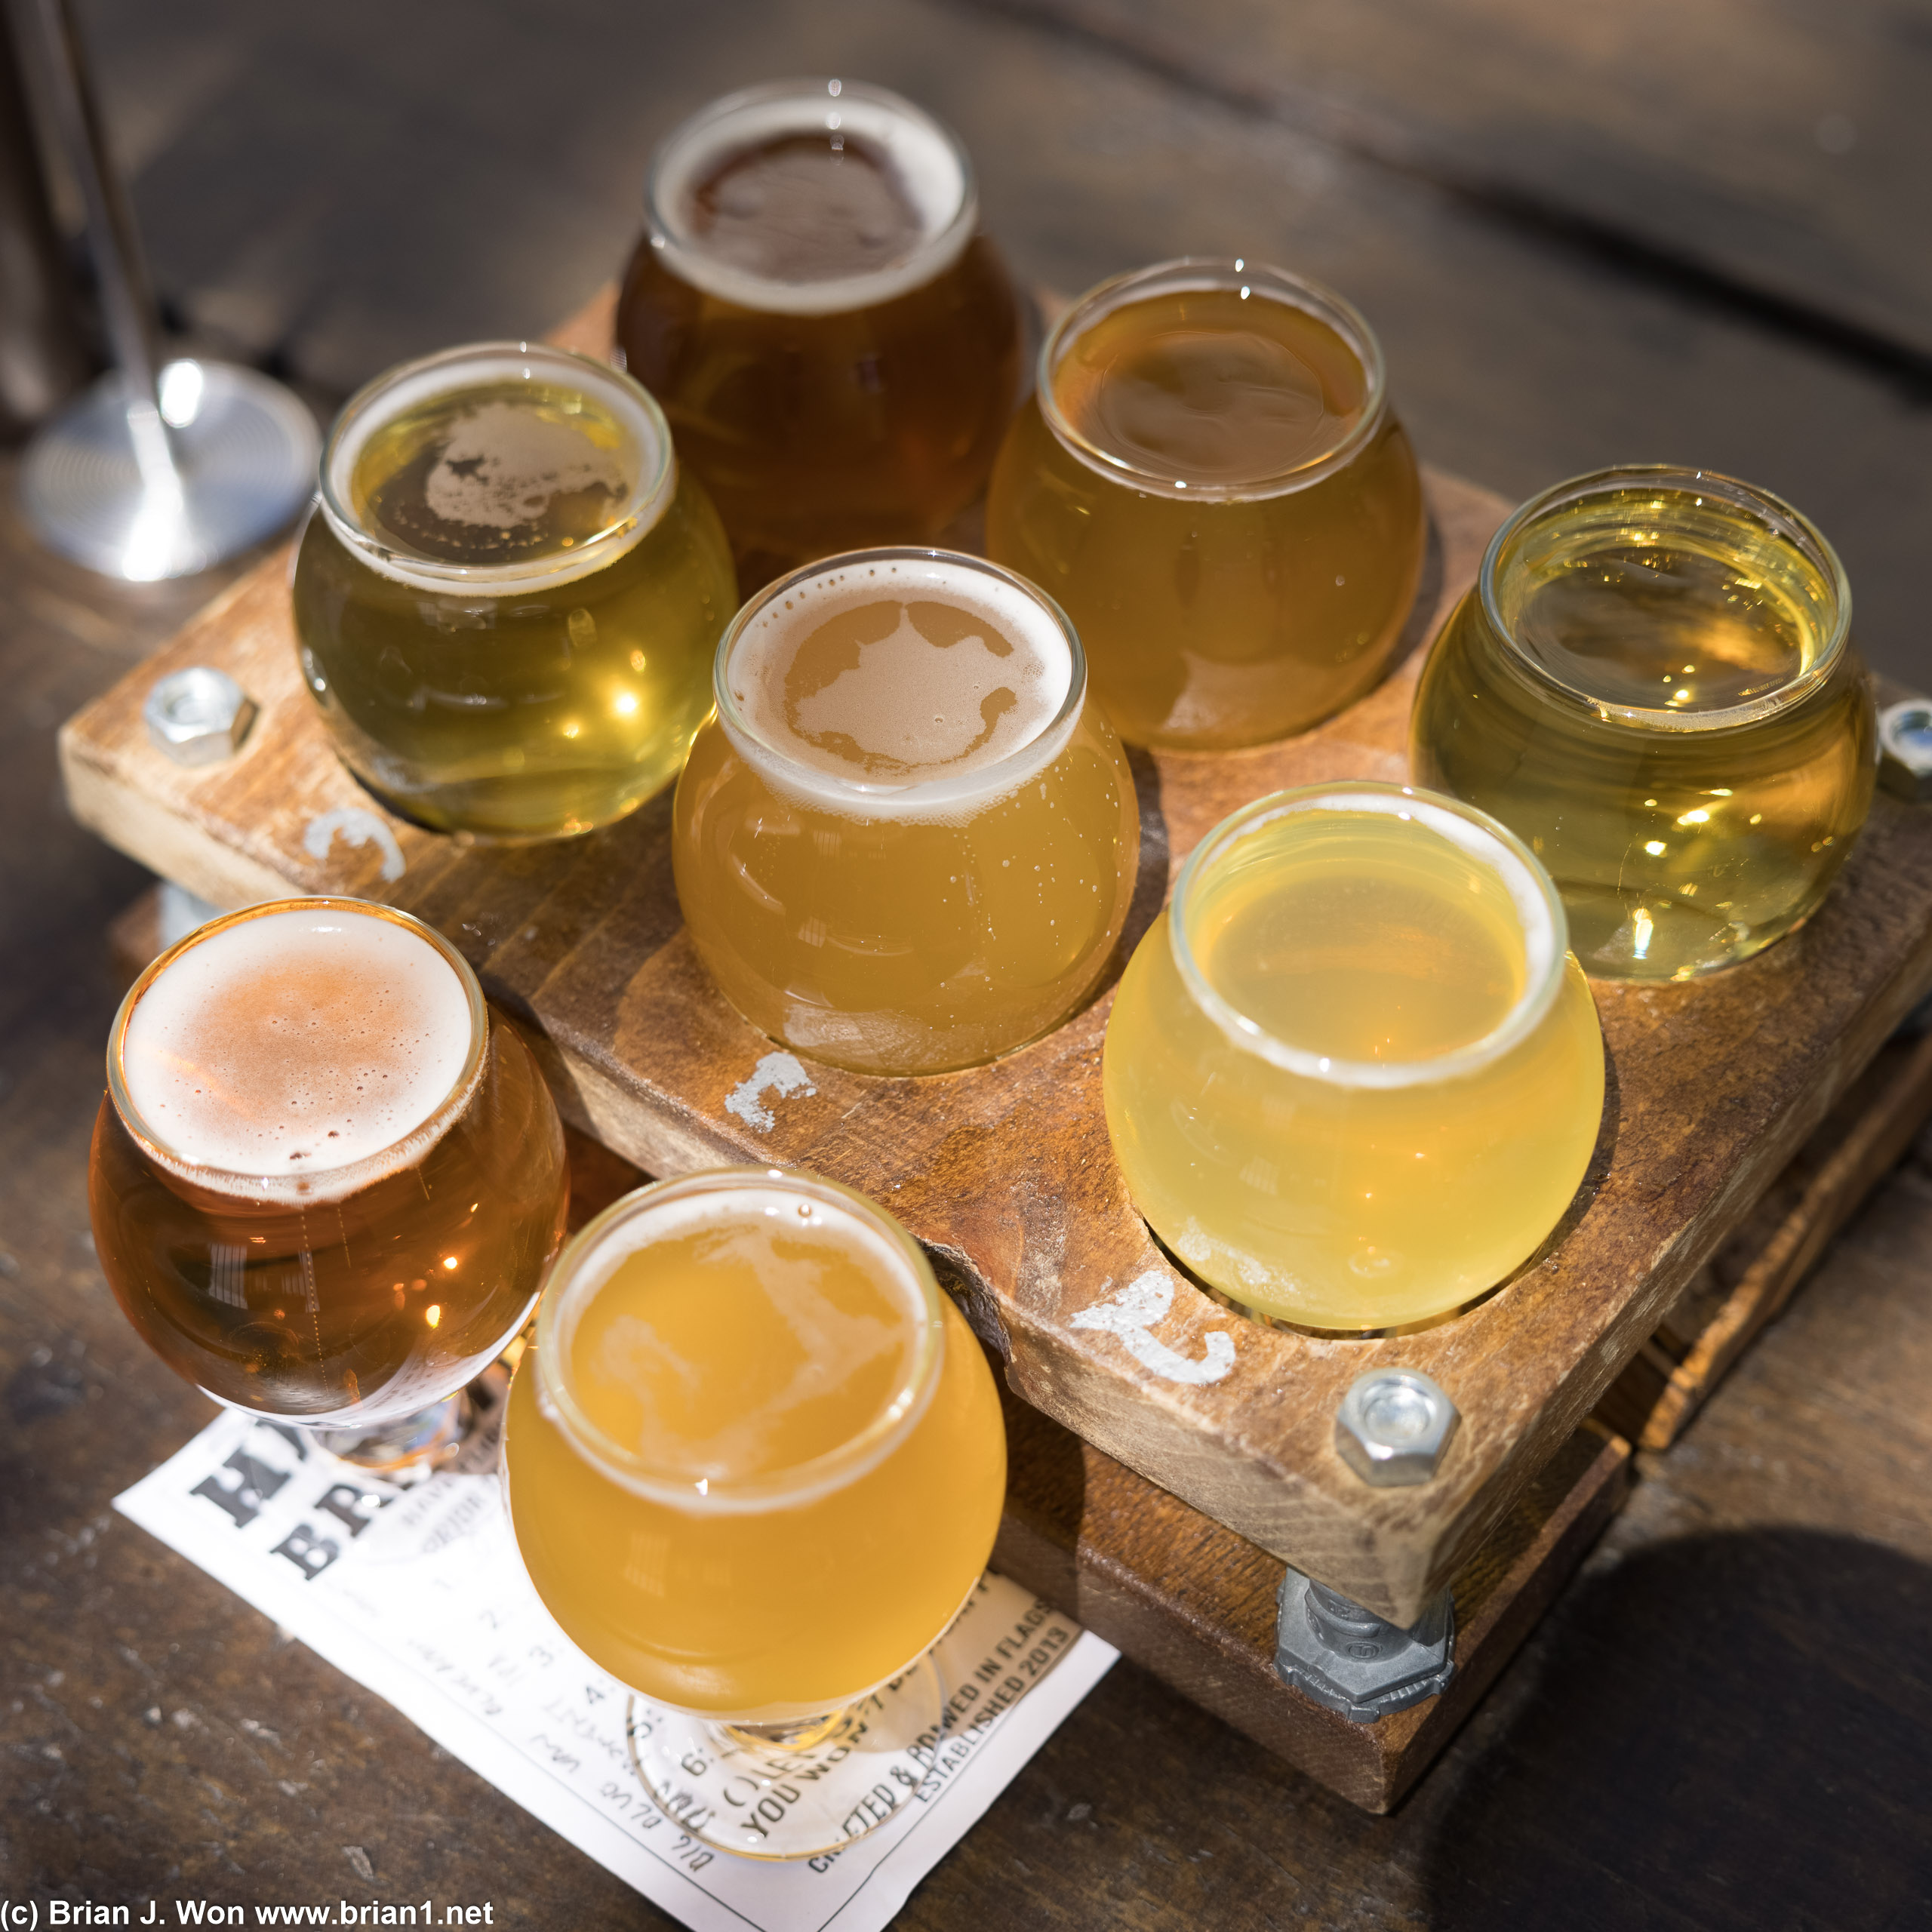 (1-6) Oceanfront Property Mexican lager, Salt River lager, Undercover Cucumber blonde, State 48 Mango wheat, Factz DIPA, Kellerfront Poperty lager, plus Big Blue Van blueberry wheat and Spare Moment IPA.